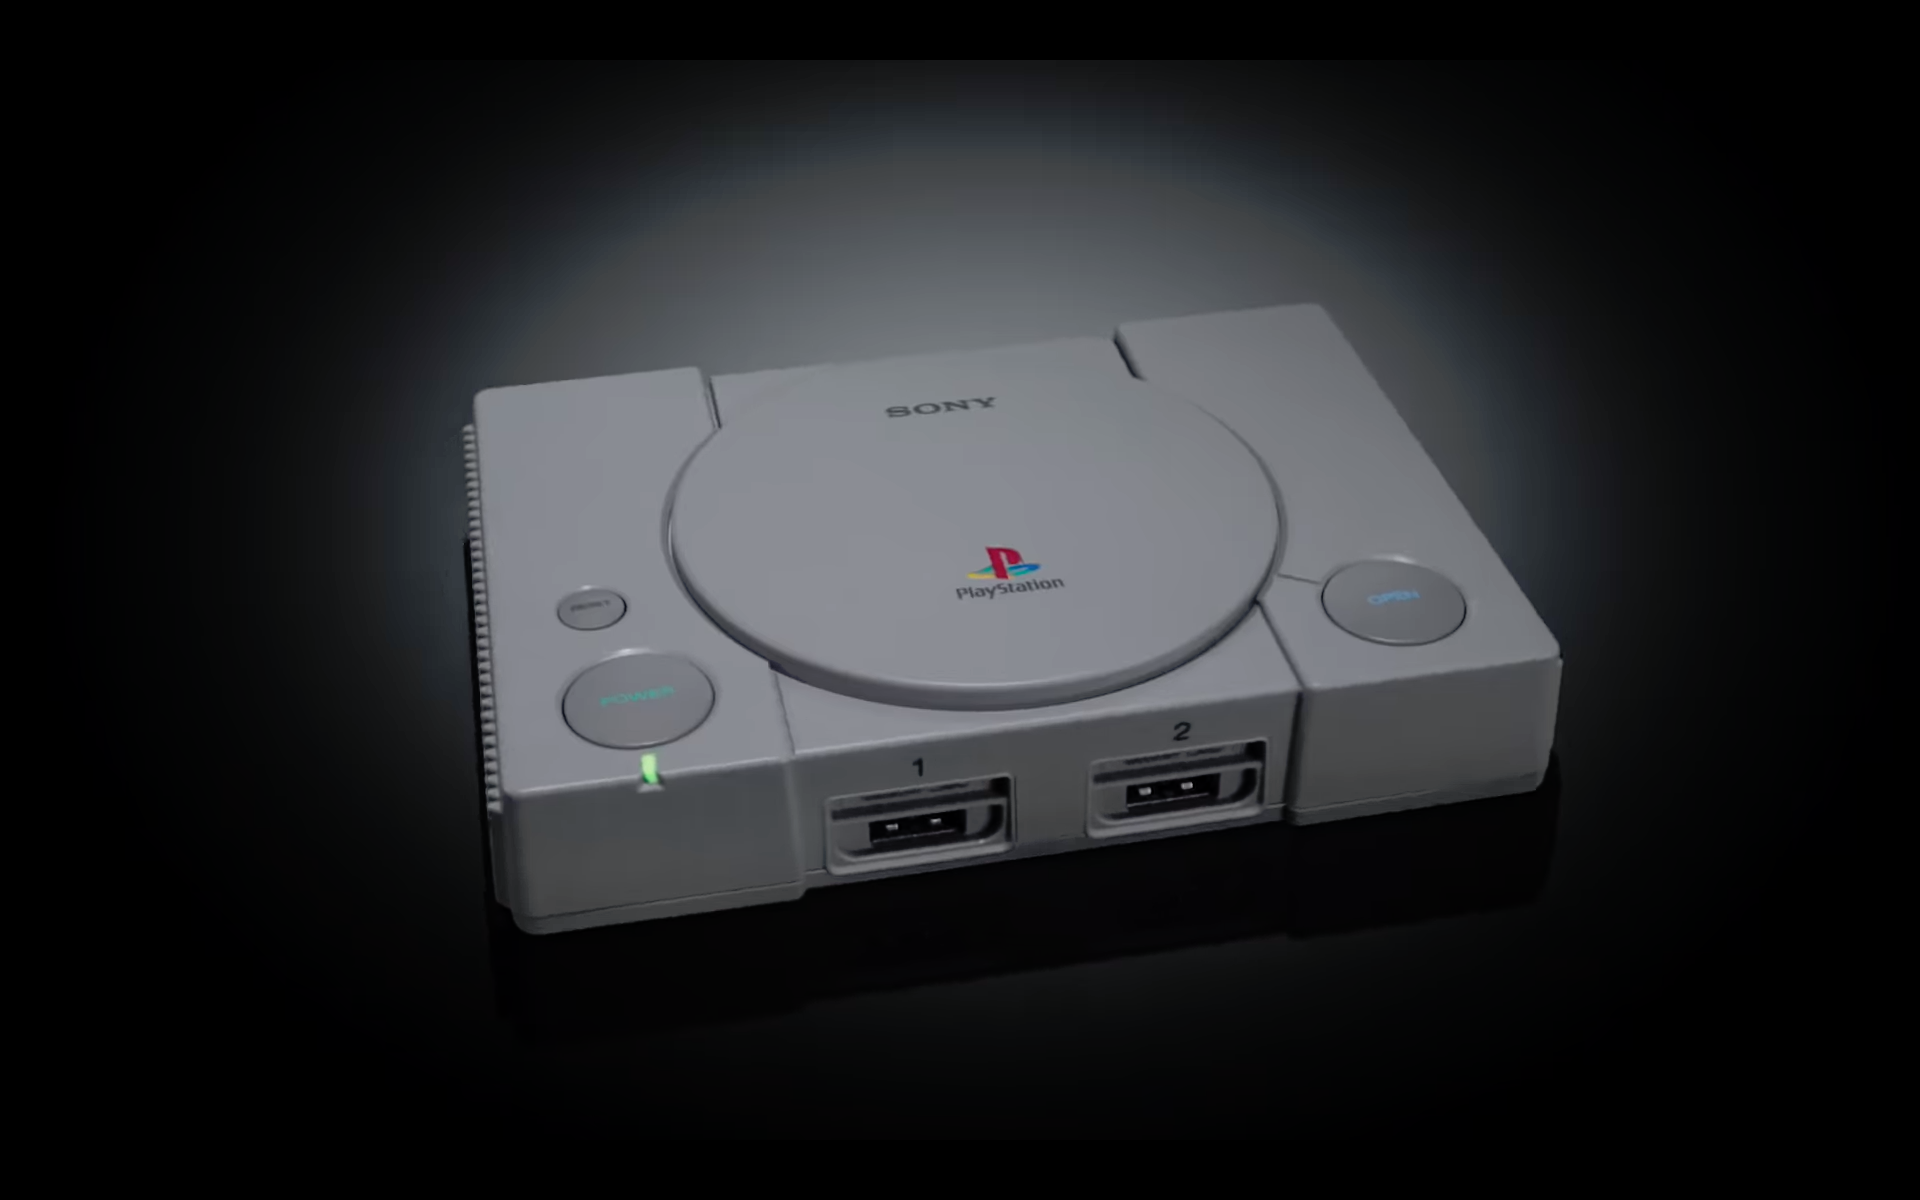 The Playstation Classic